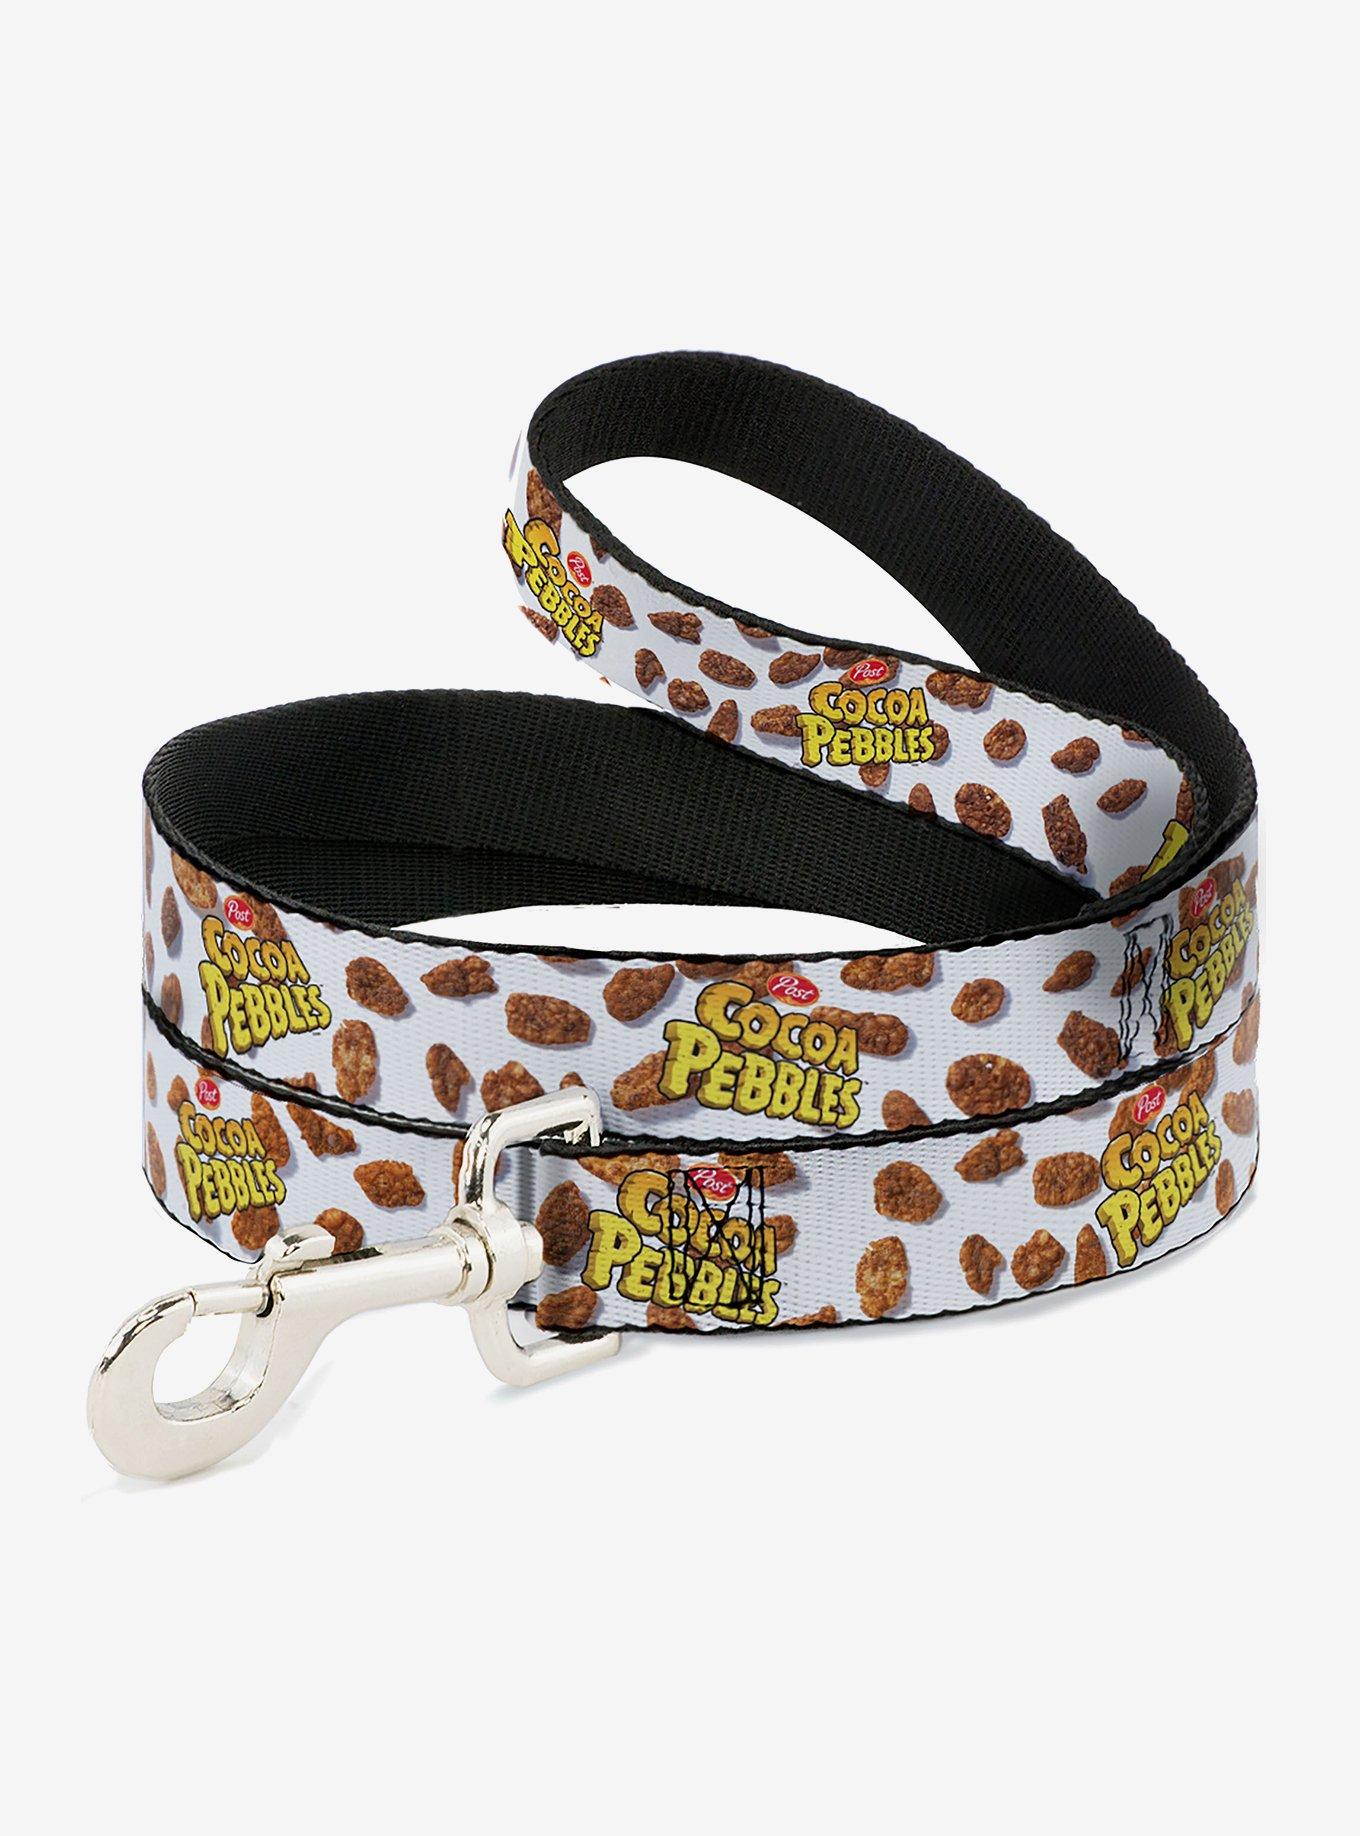 The Flintstones Cocoa Pebbles Cereal Pebbles Scattered Dog Leash, BRIGHT WHITE, hi-res